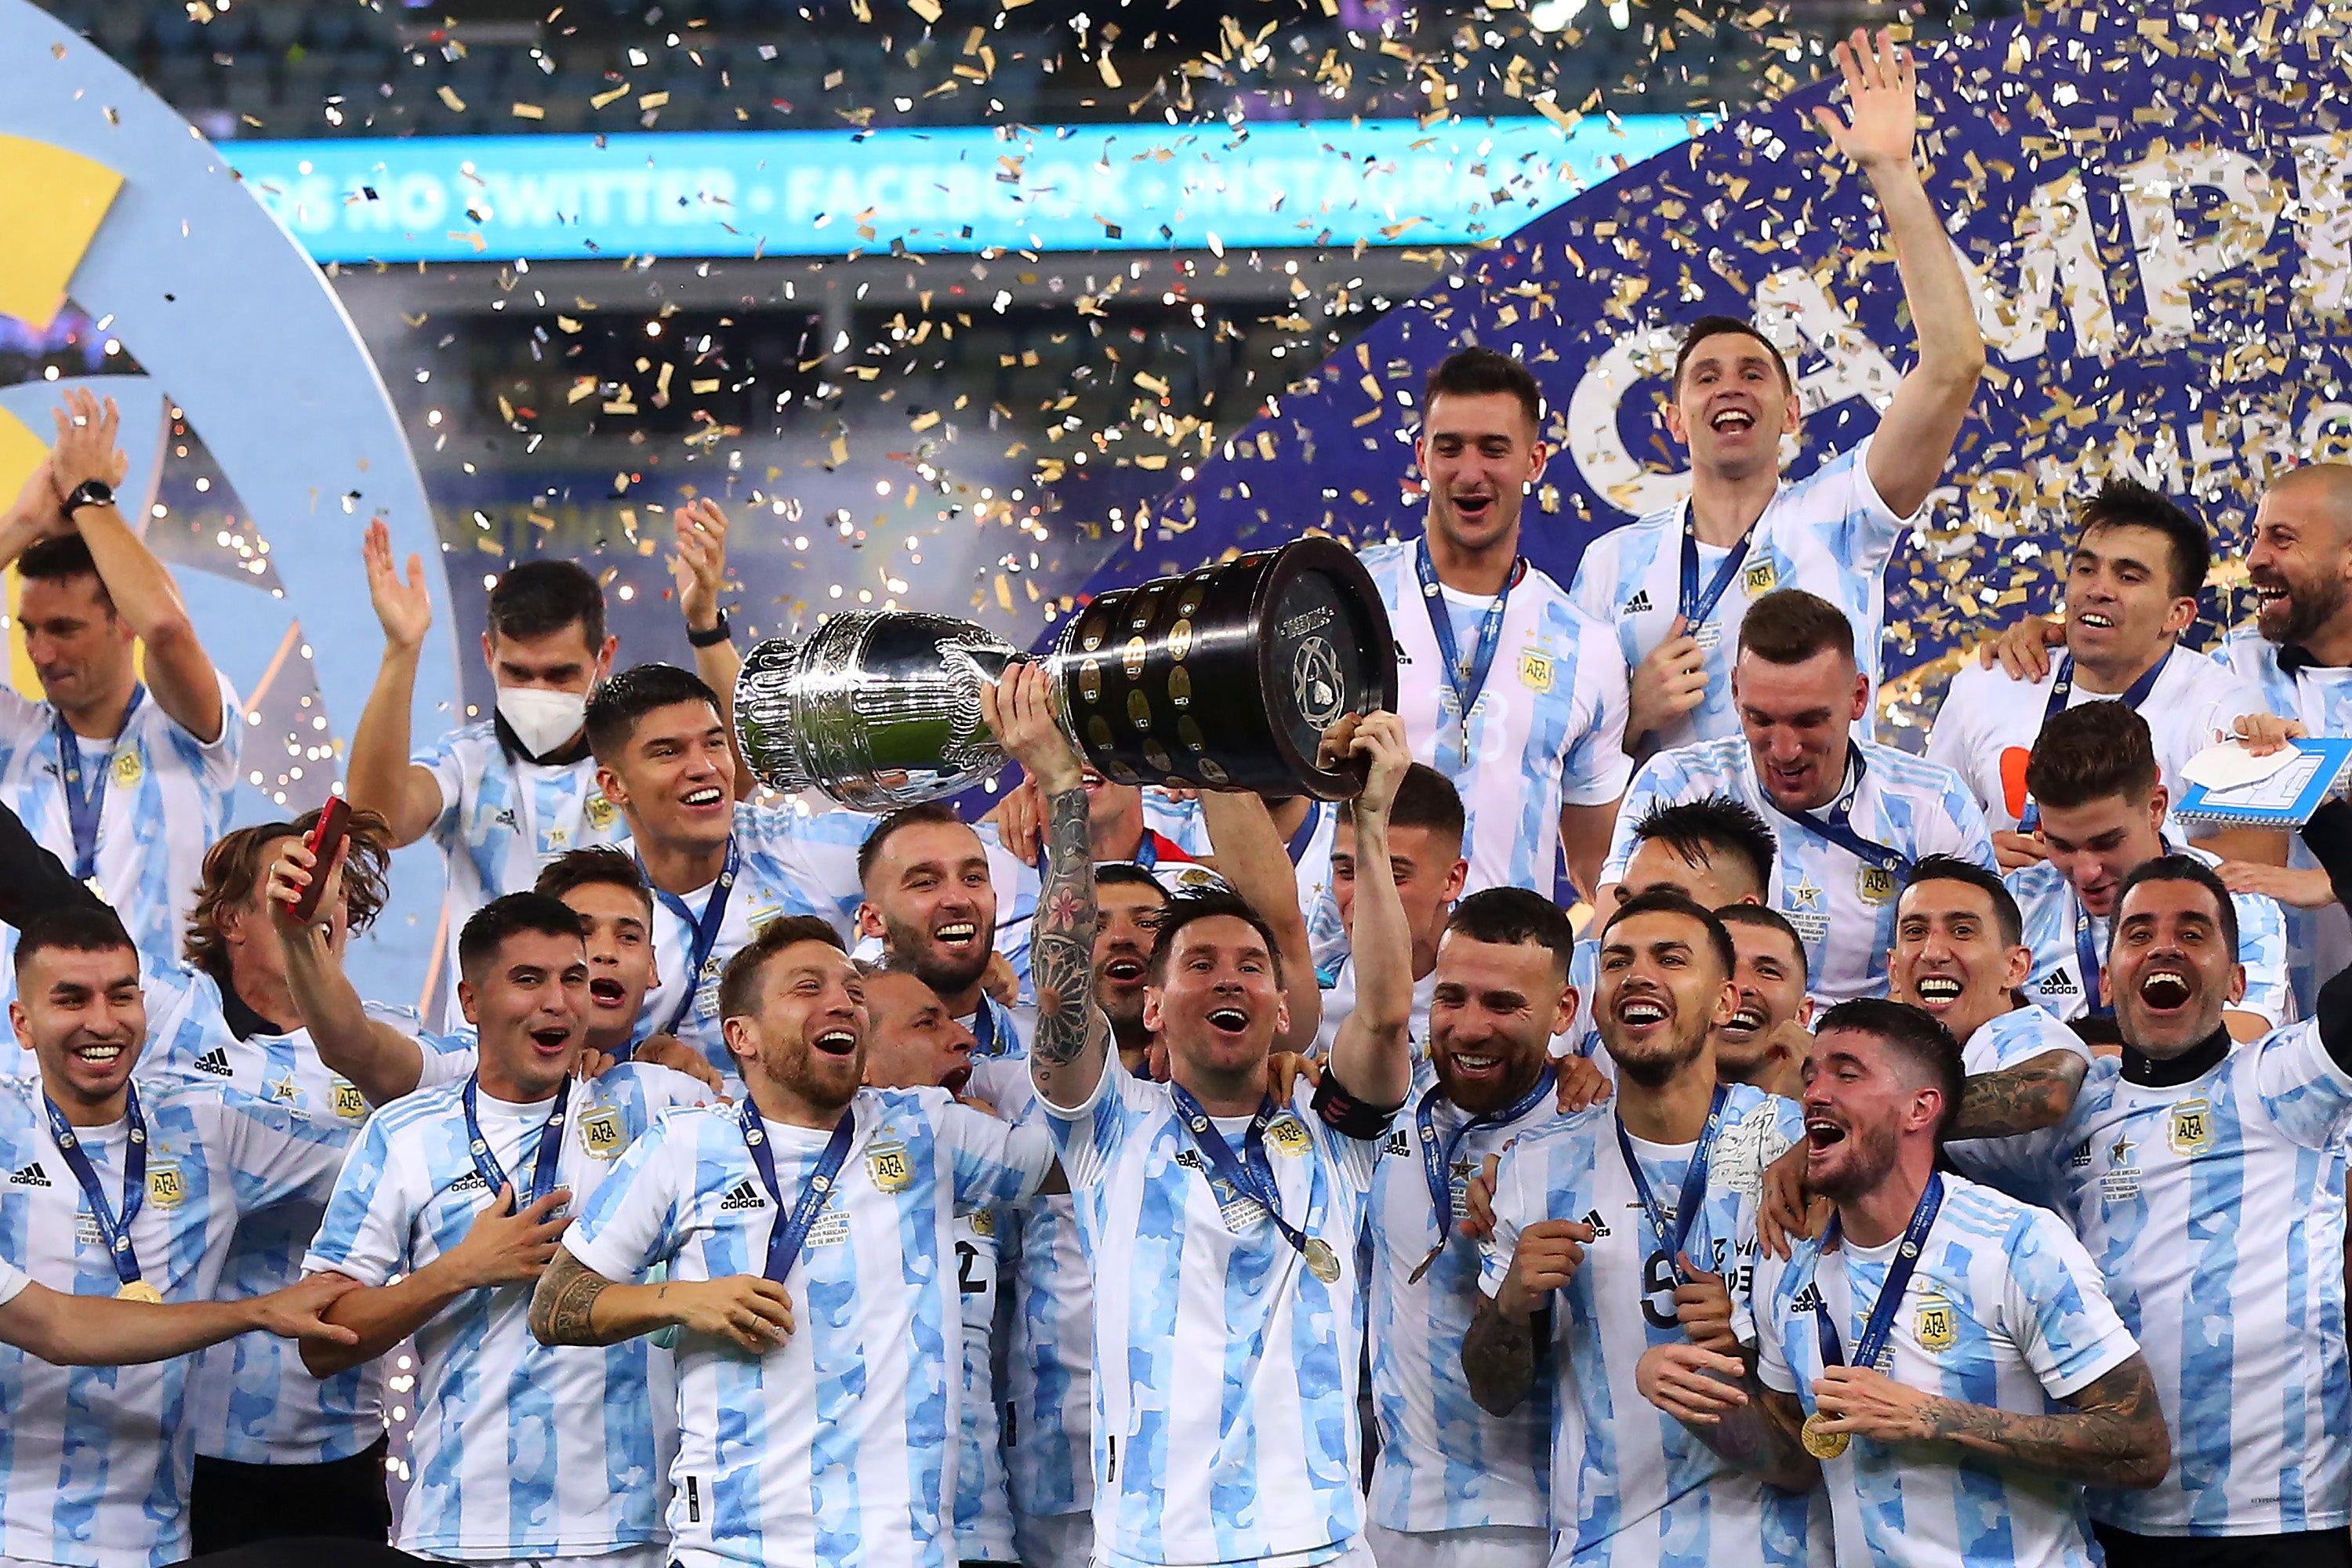 Messi finally captured an international trophy by lifting last year’s Copa America